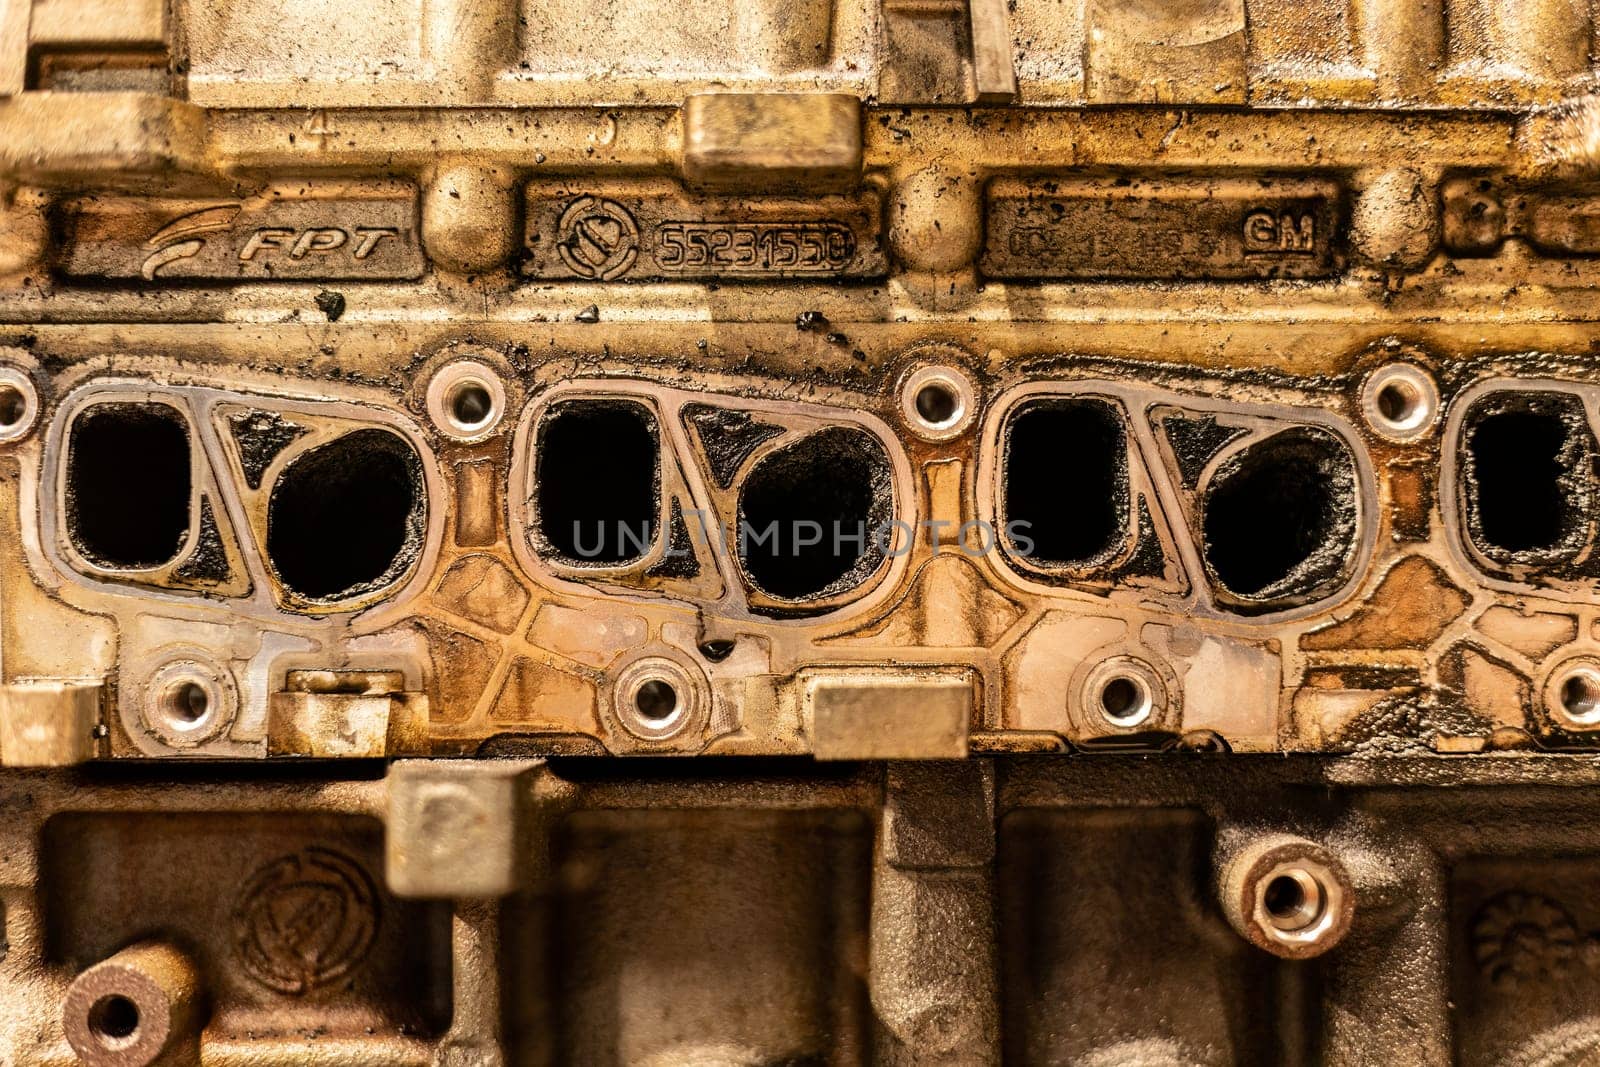 A photo showing dirty intake manifolds in a car engine, impacted by exhaust gas recirculation (EGR) effects.